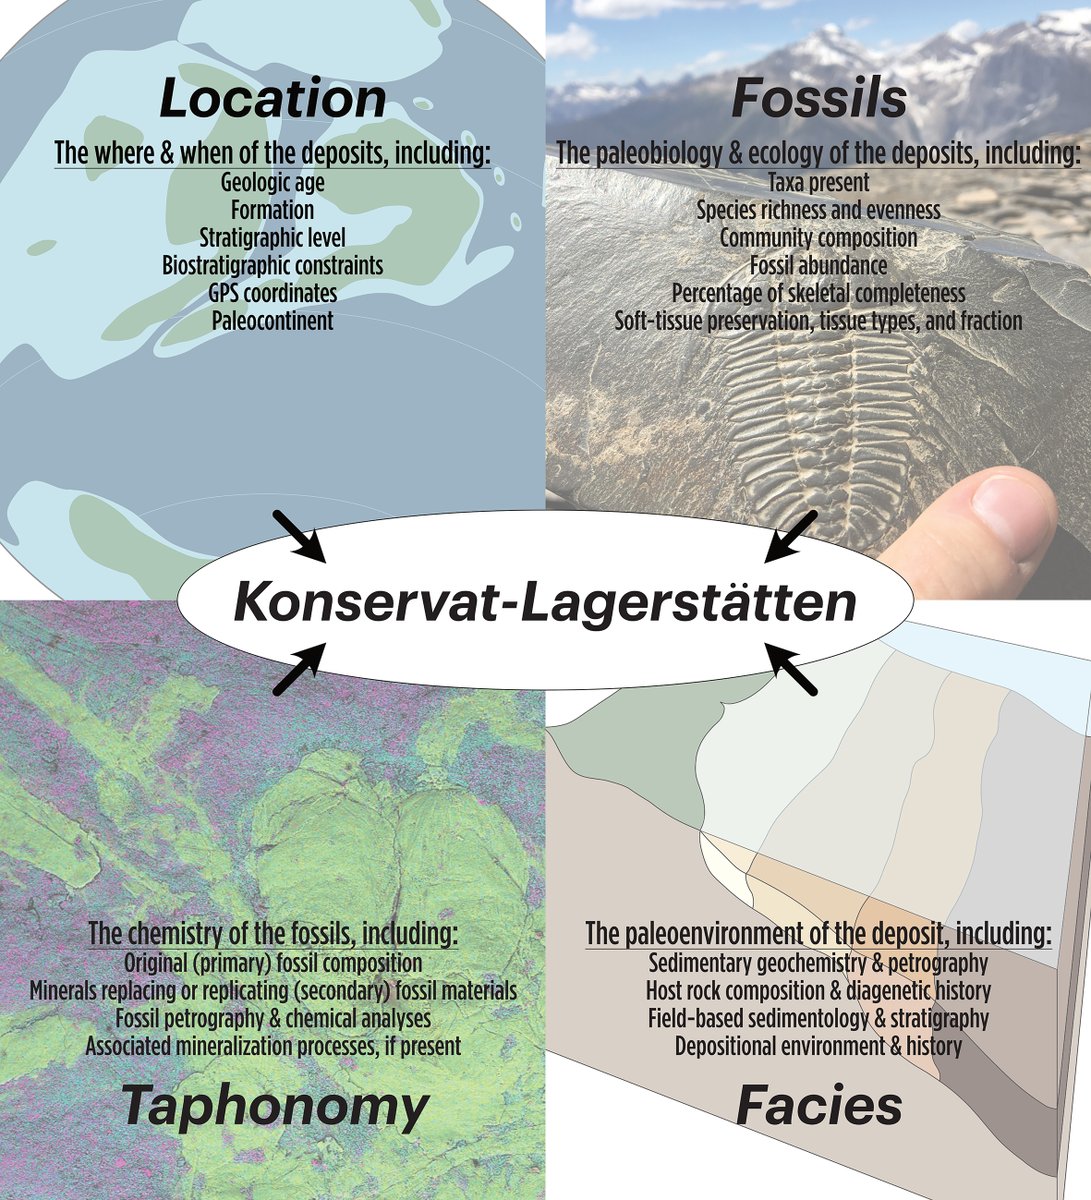 Fresh of the press. Fossil-Lagerstätten are the most important windows into ancient ecosystems. However their classification and what makes an exceptionally preserved fossil have been inconsistent. Paper (50 free downloads): sciencedirect.com/science/articl…